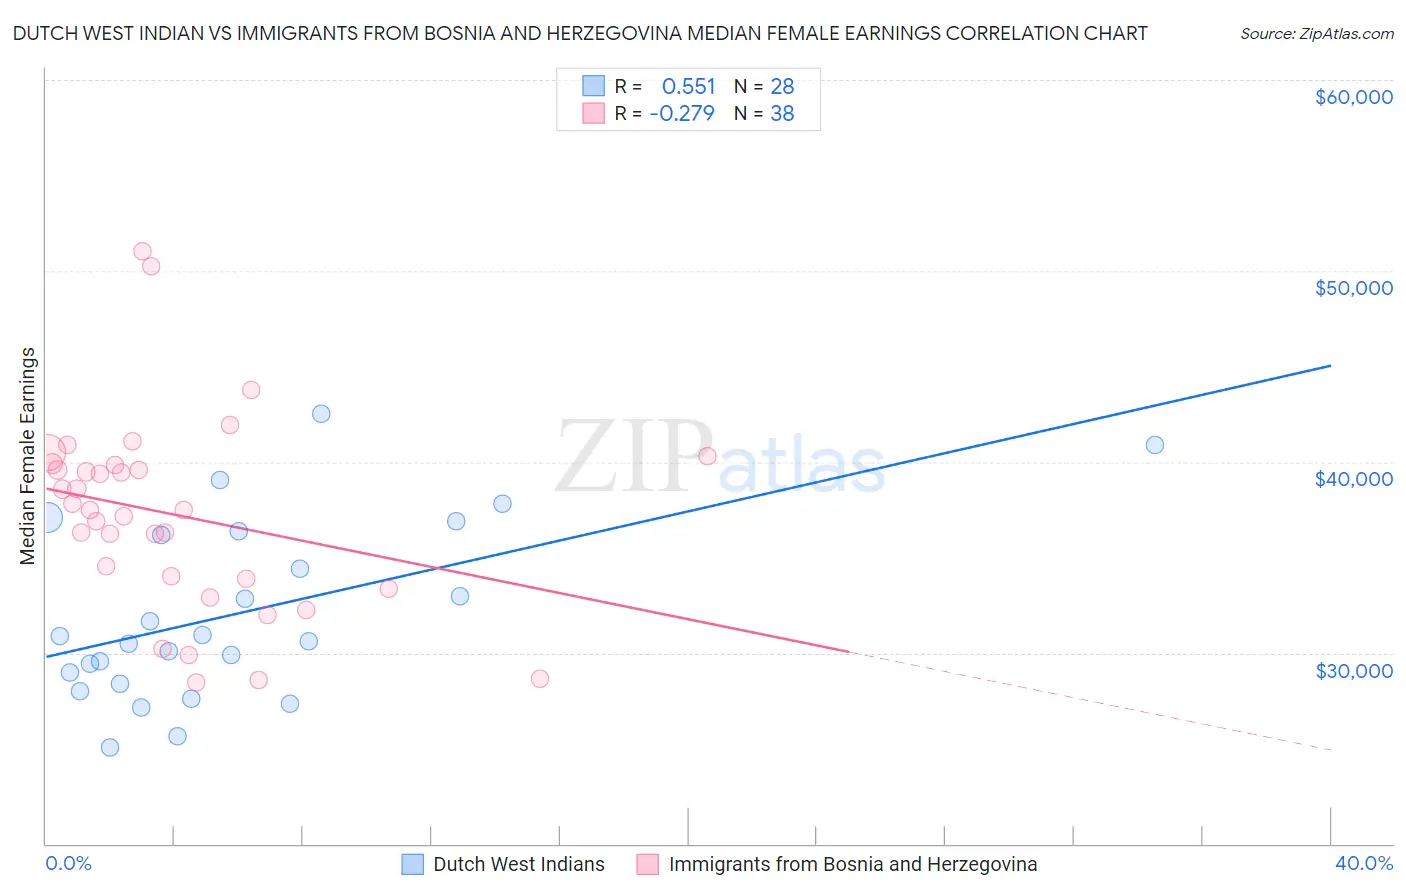 Dutch West Indian vs Immigrants from Bosnia and Herzegovina Median Female Earnings